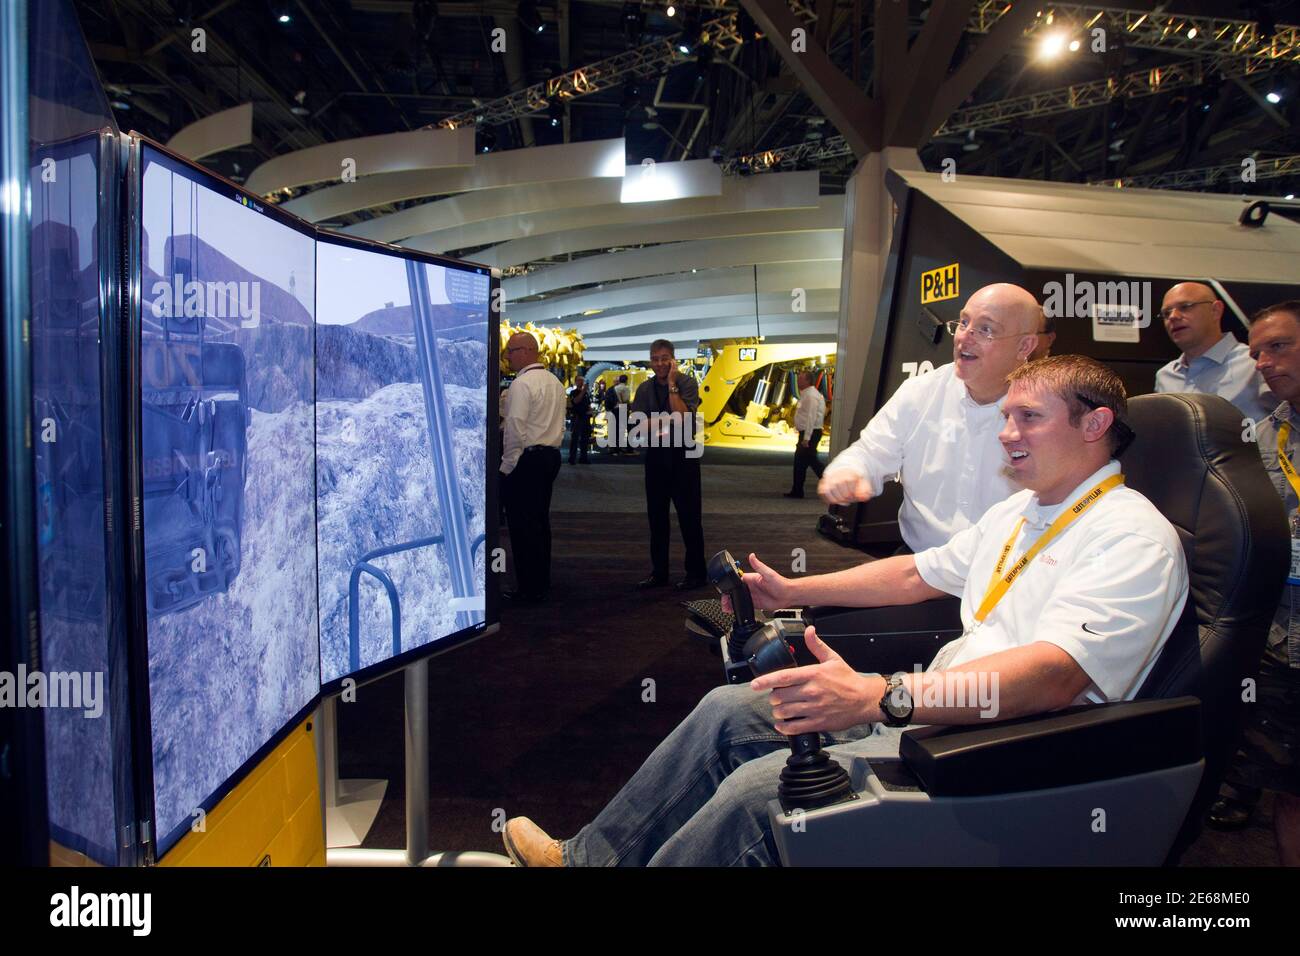 Lee Griffin (C) of JoyGlobal looks on as Michael Hemphill, a maintenance engineer, operates a mining shovel simulator during the MINExpo International 2012 trade show at the Las Vegas Convention Center in Las Vegas, Nevada September 24, 2012. REUTERS/Las Vegas Sun/Steve Marcus (UNITED STATES - Tags: BUSINESS INDUSTRIAL) Stock Photo